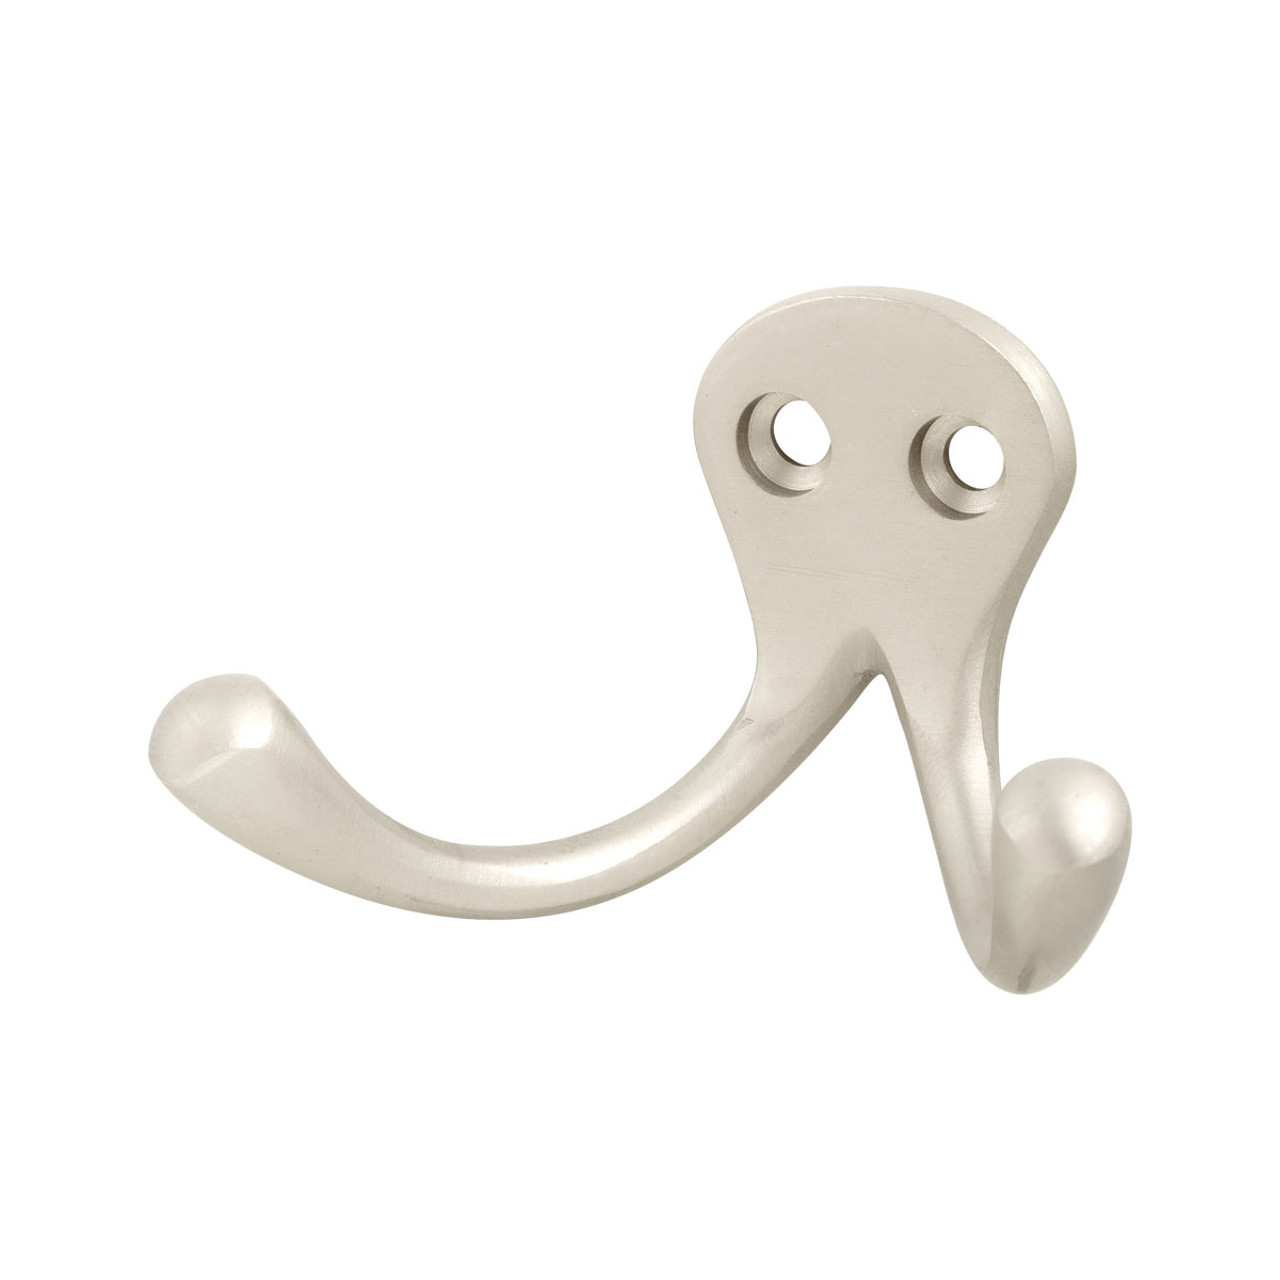 https://cdn11.bigcommerce.com/s-cznxq08r7/images/stencil/1280x1280/products/5705/15499/COATHOOK-2-BS_Bar_Face_Purse_Coat_Hook_-_Double_-_Brushed_Stainless_Steel__26768.1707510657.jpg?c=1